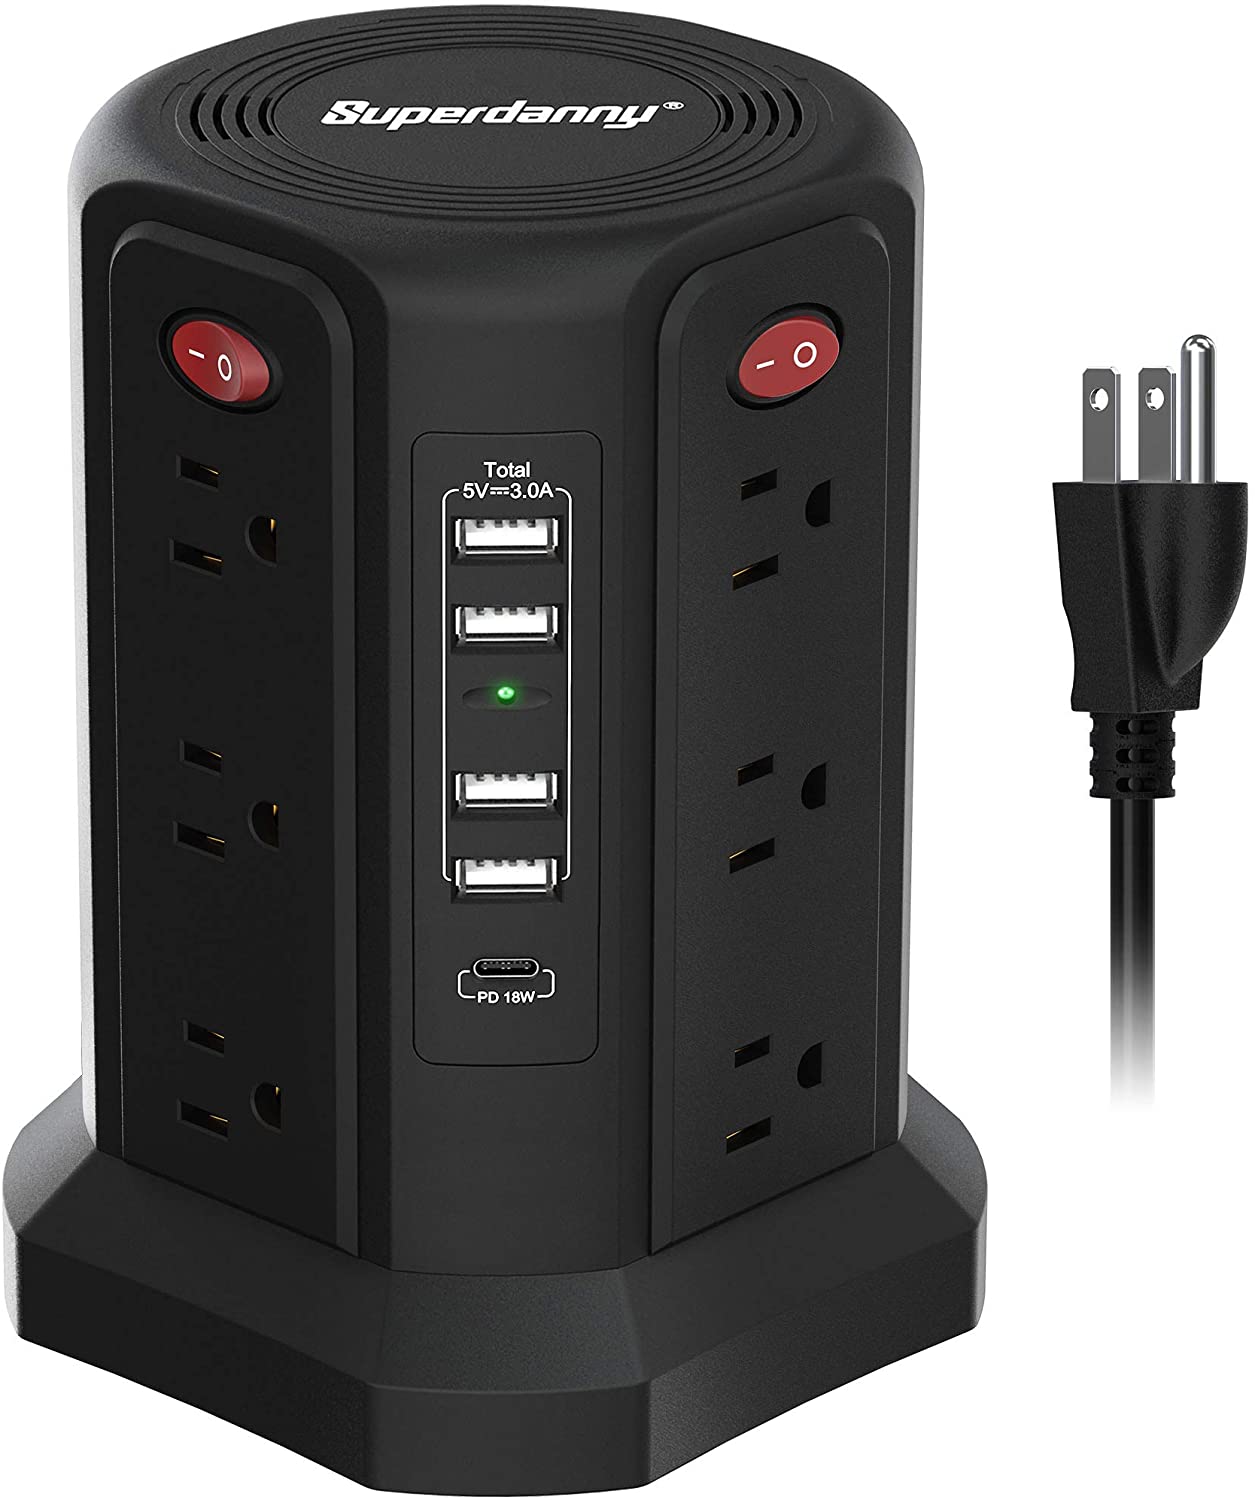 USB Wall Charger Surge Protector 5 Outlet Extender with 3 USB Ports， 3-Sided 1680J Power Strip Multi Plug Outlets Wall Adapter Spaced for Home Travel Office 2USB 1Typc C 